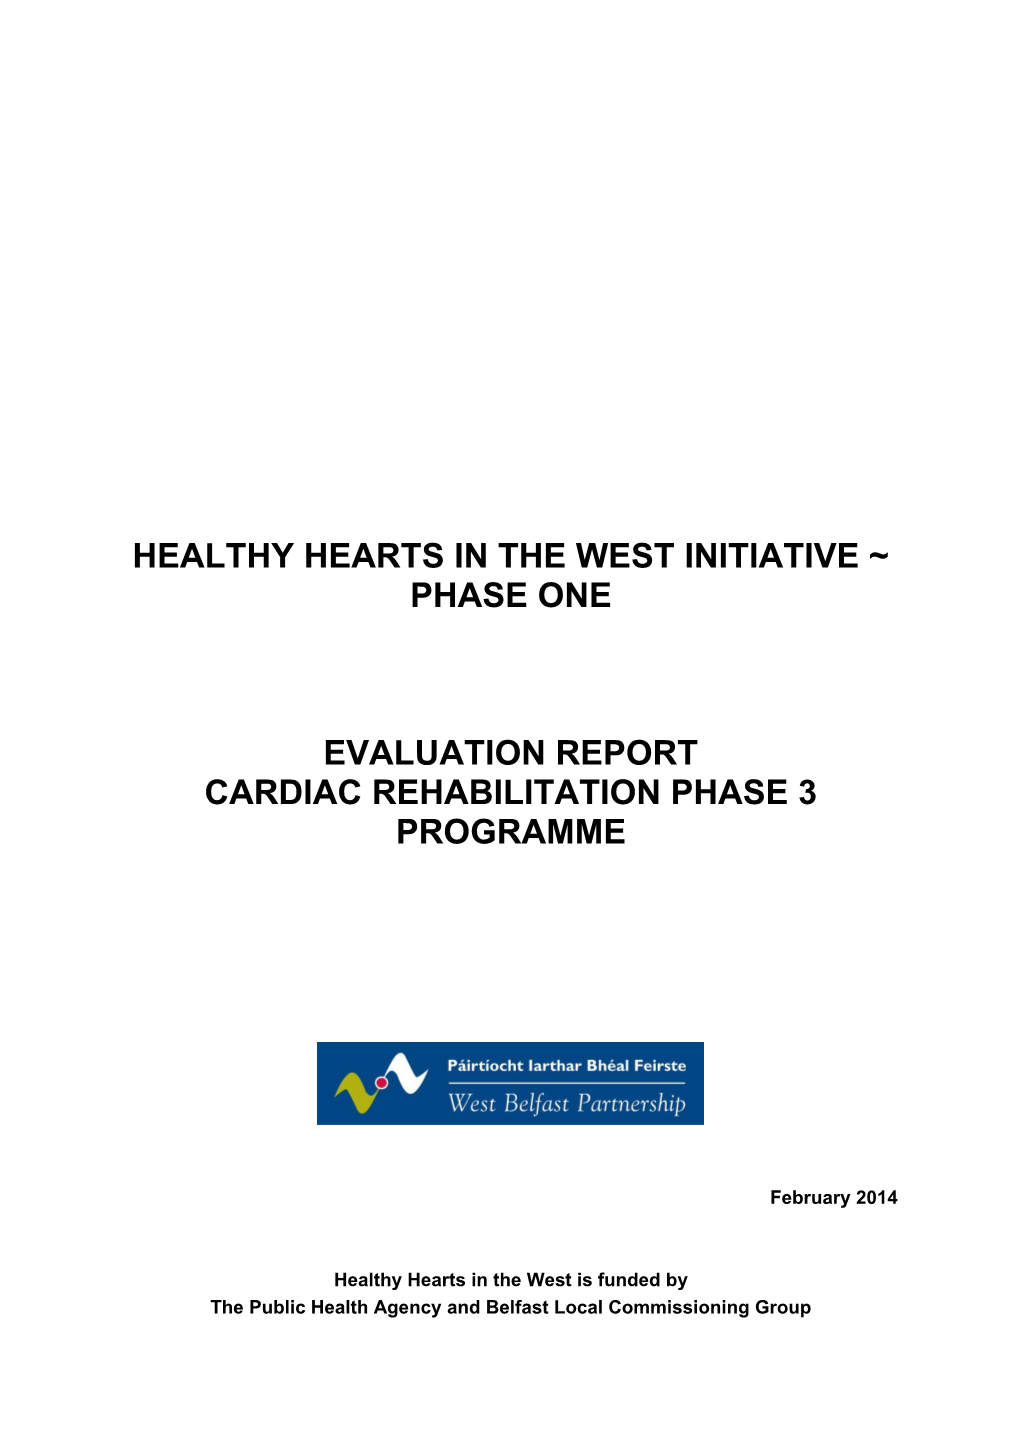 Healthy Hearts in the West Initiative Phase One